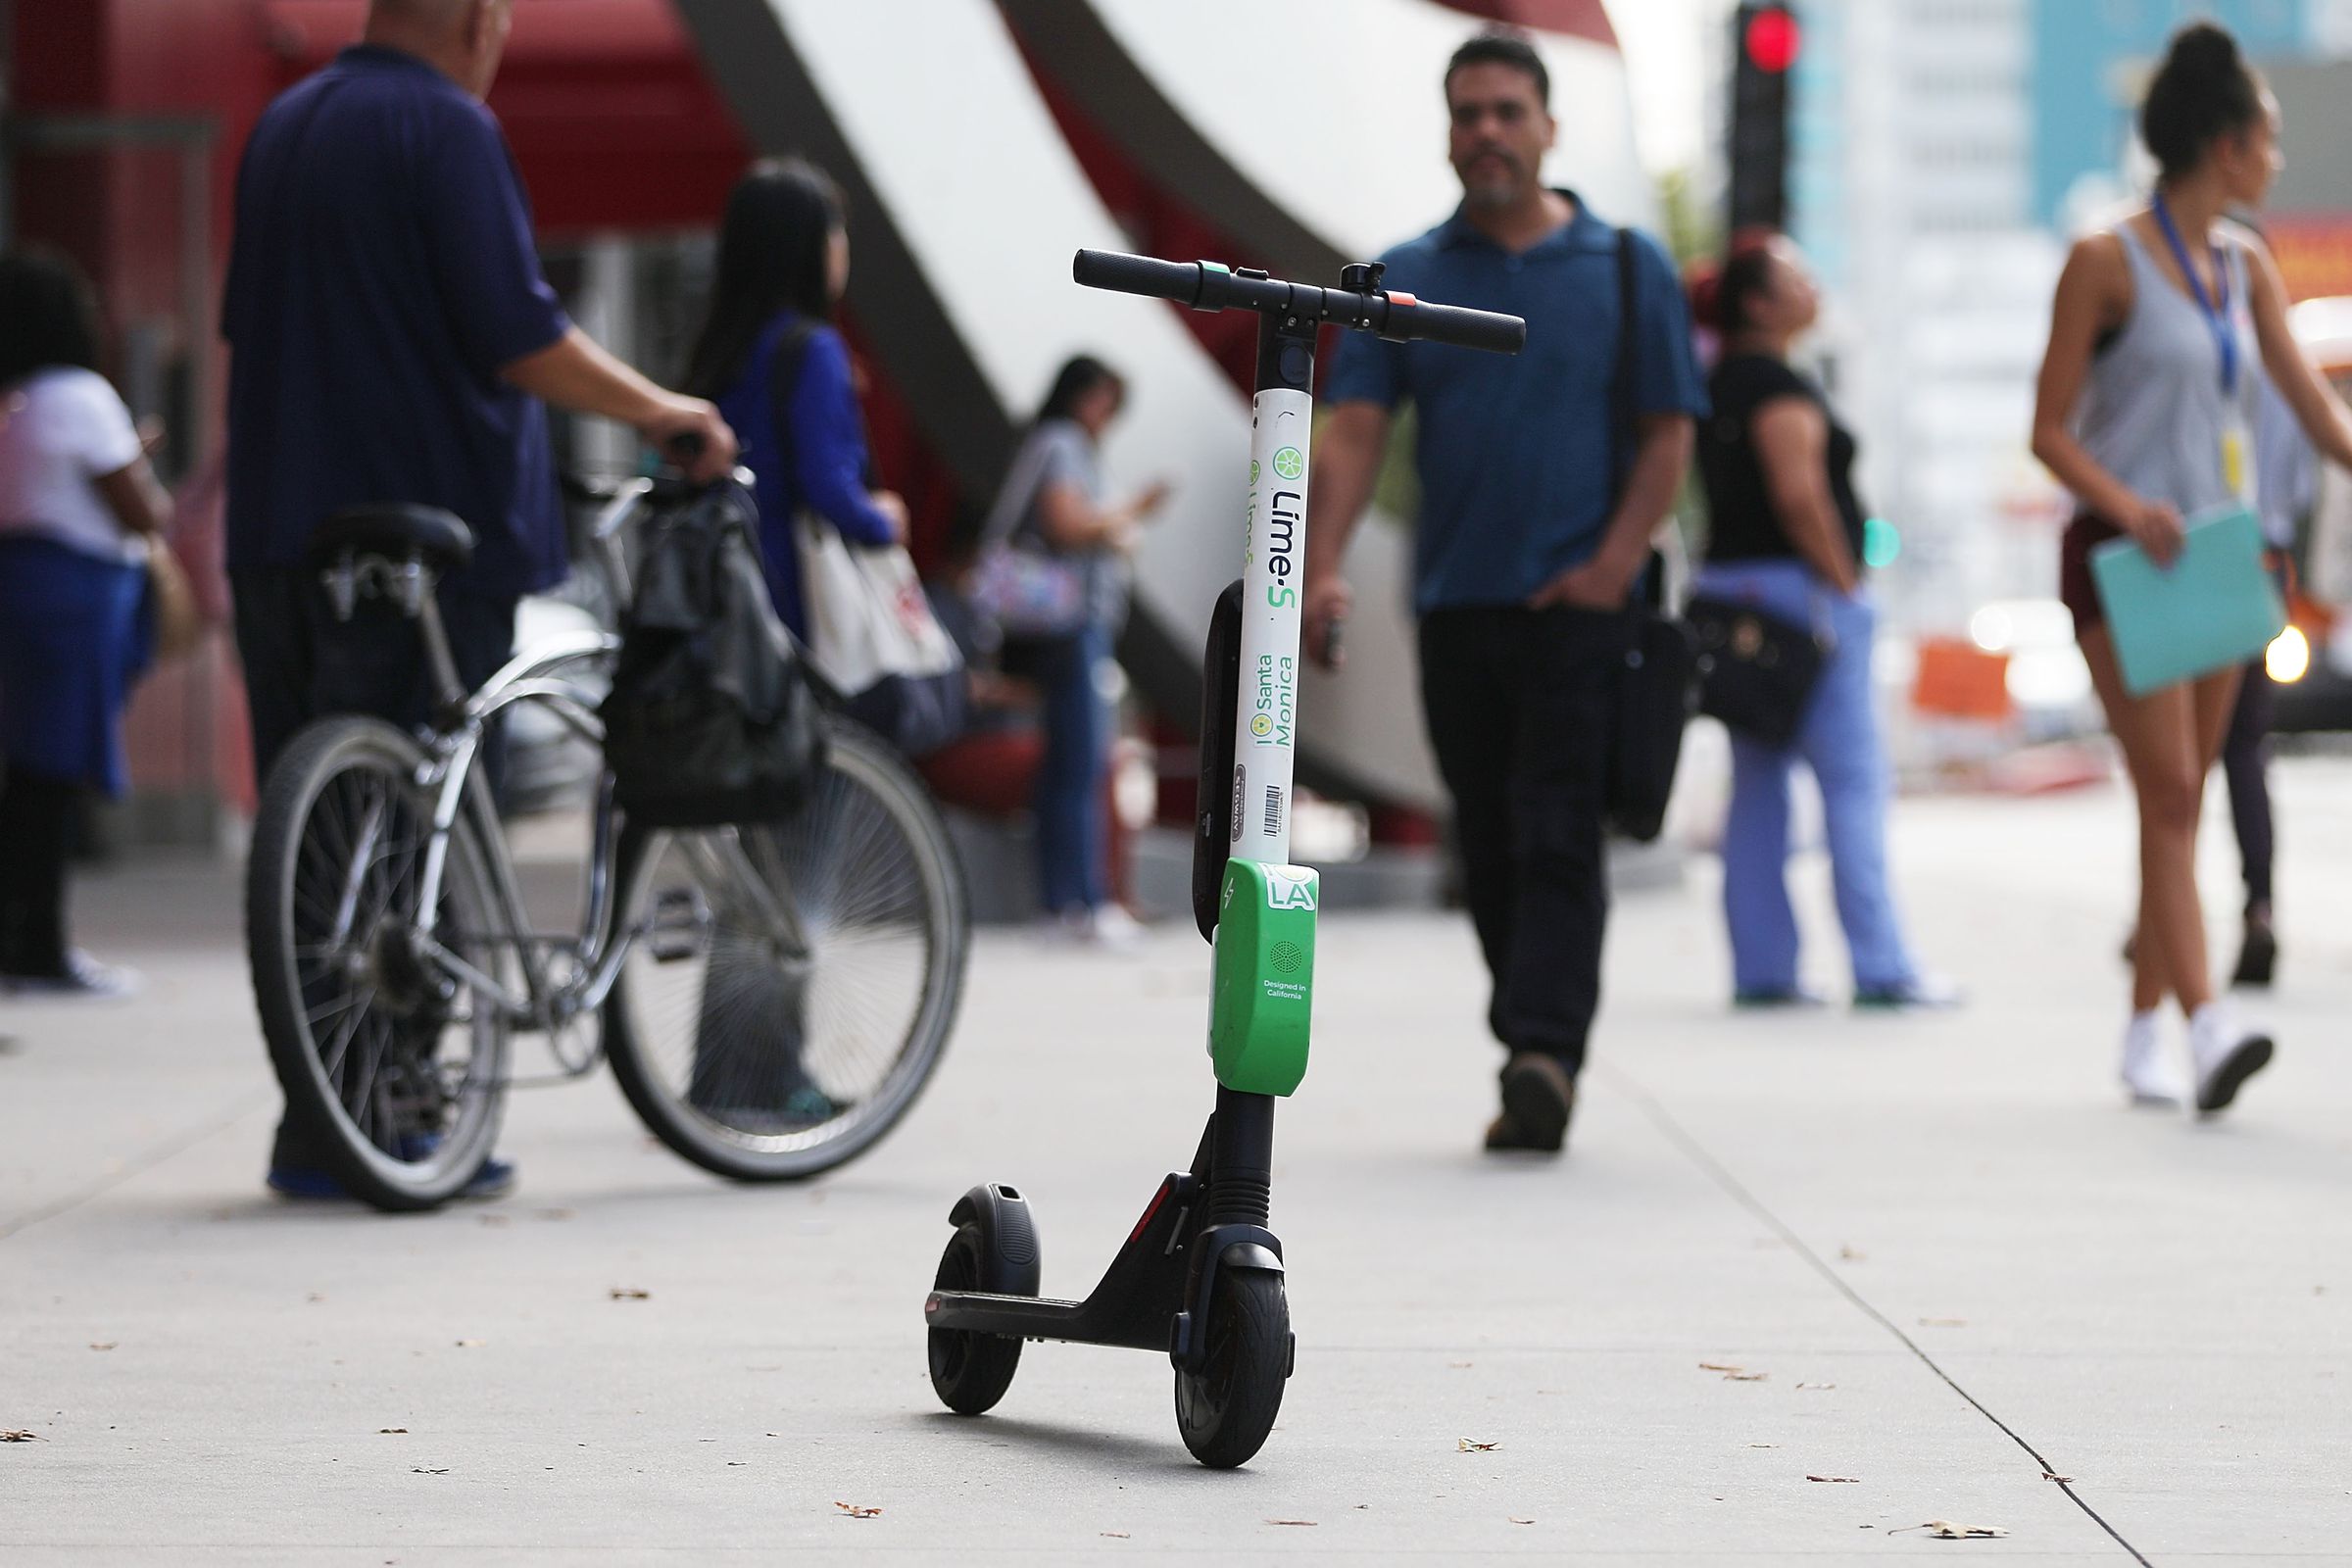 Uber To Partner With Electric Scooter Rental Company Lime In $335 Million Deal